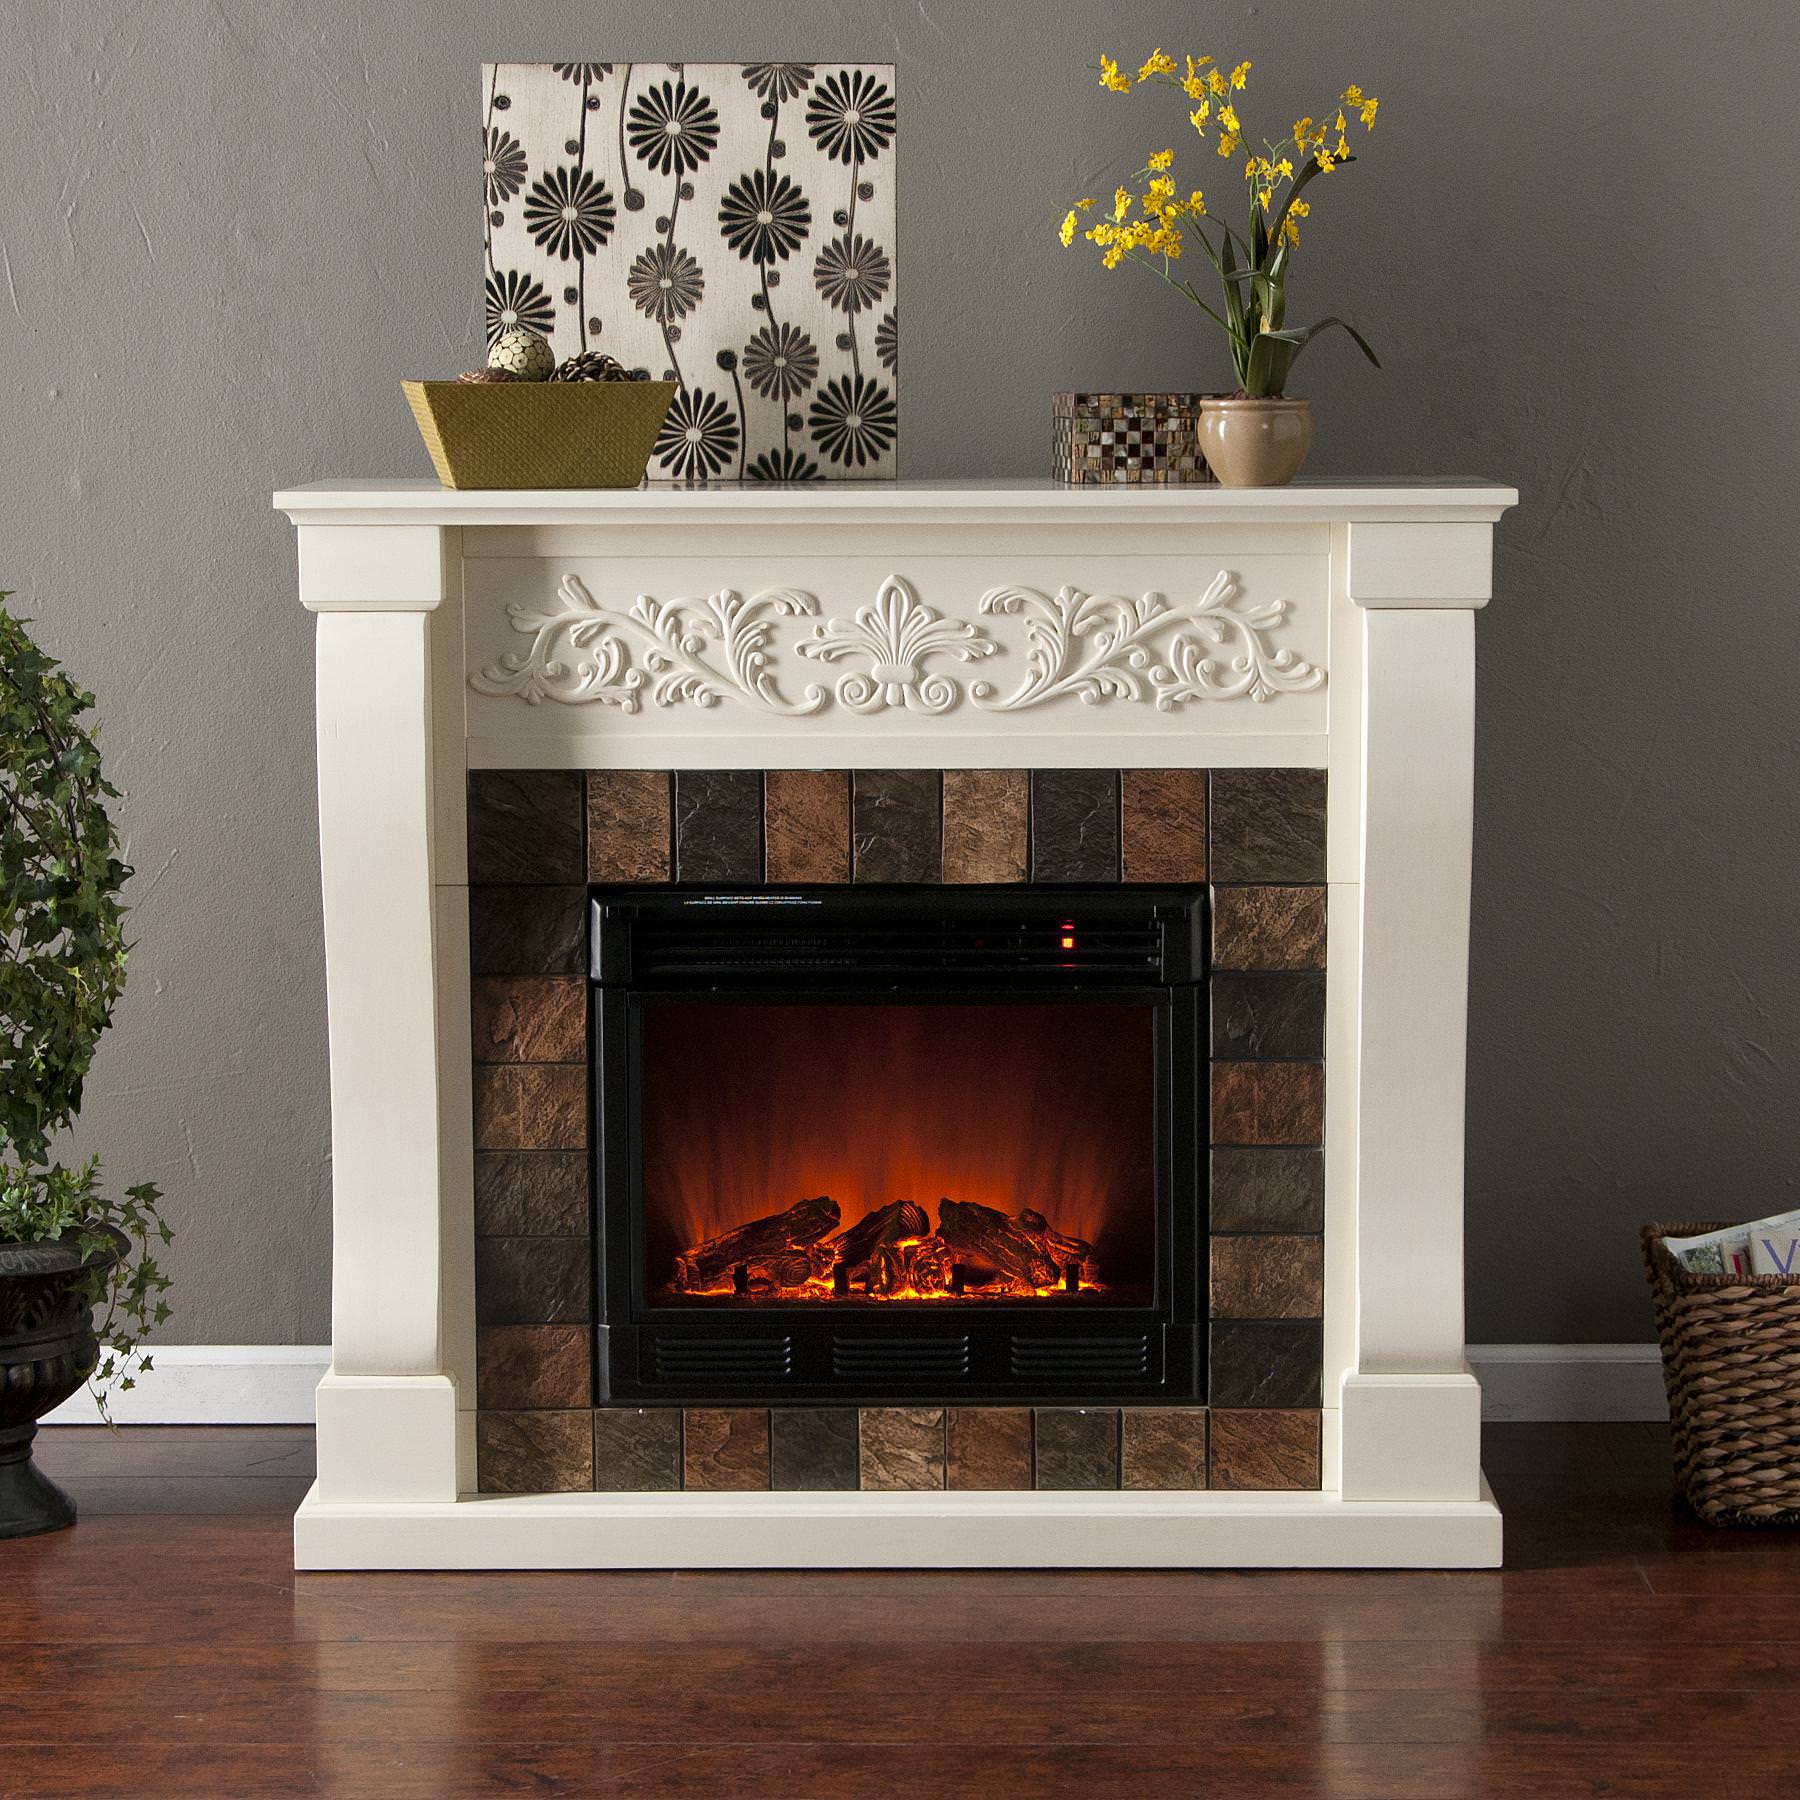 Victorian Style Fireplace Designs